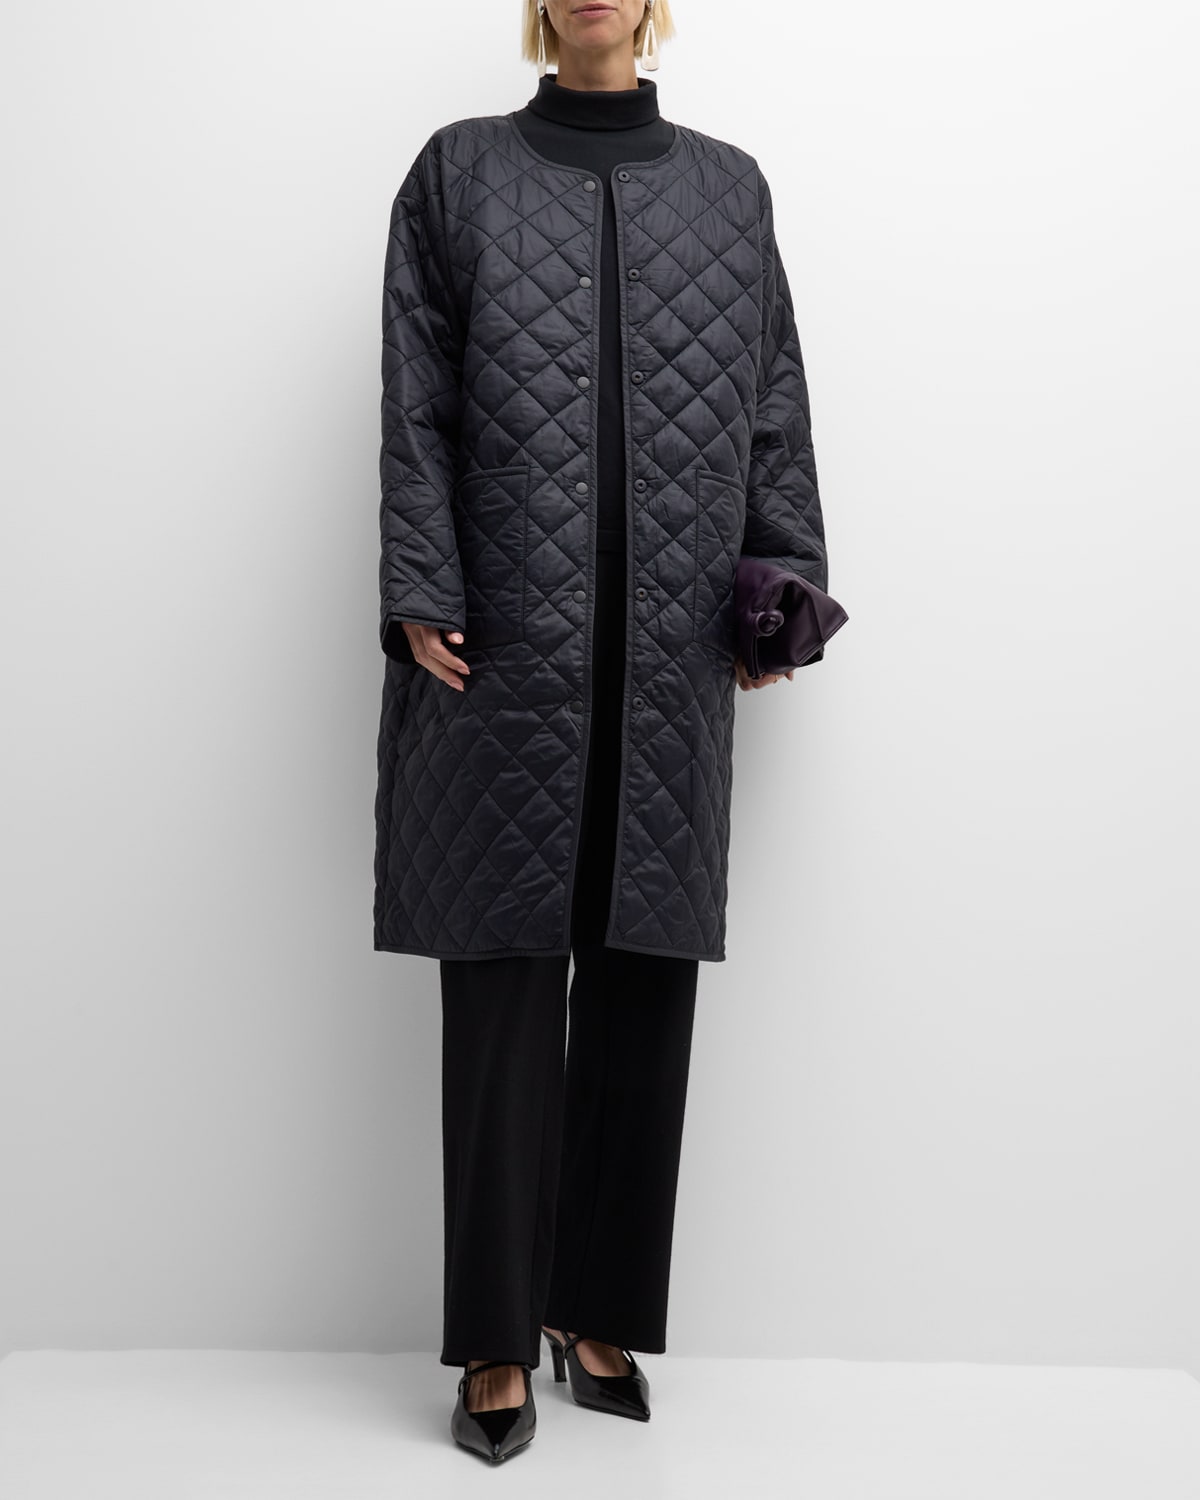 EILEEN FISHER REVERSIBLE QUILTED RECYCLED NYLON COAT